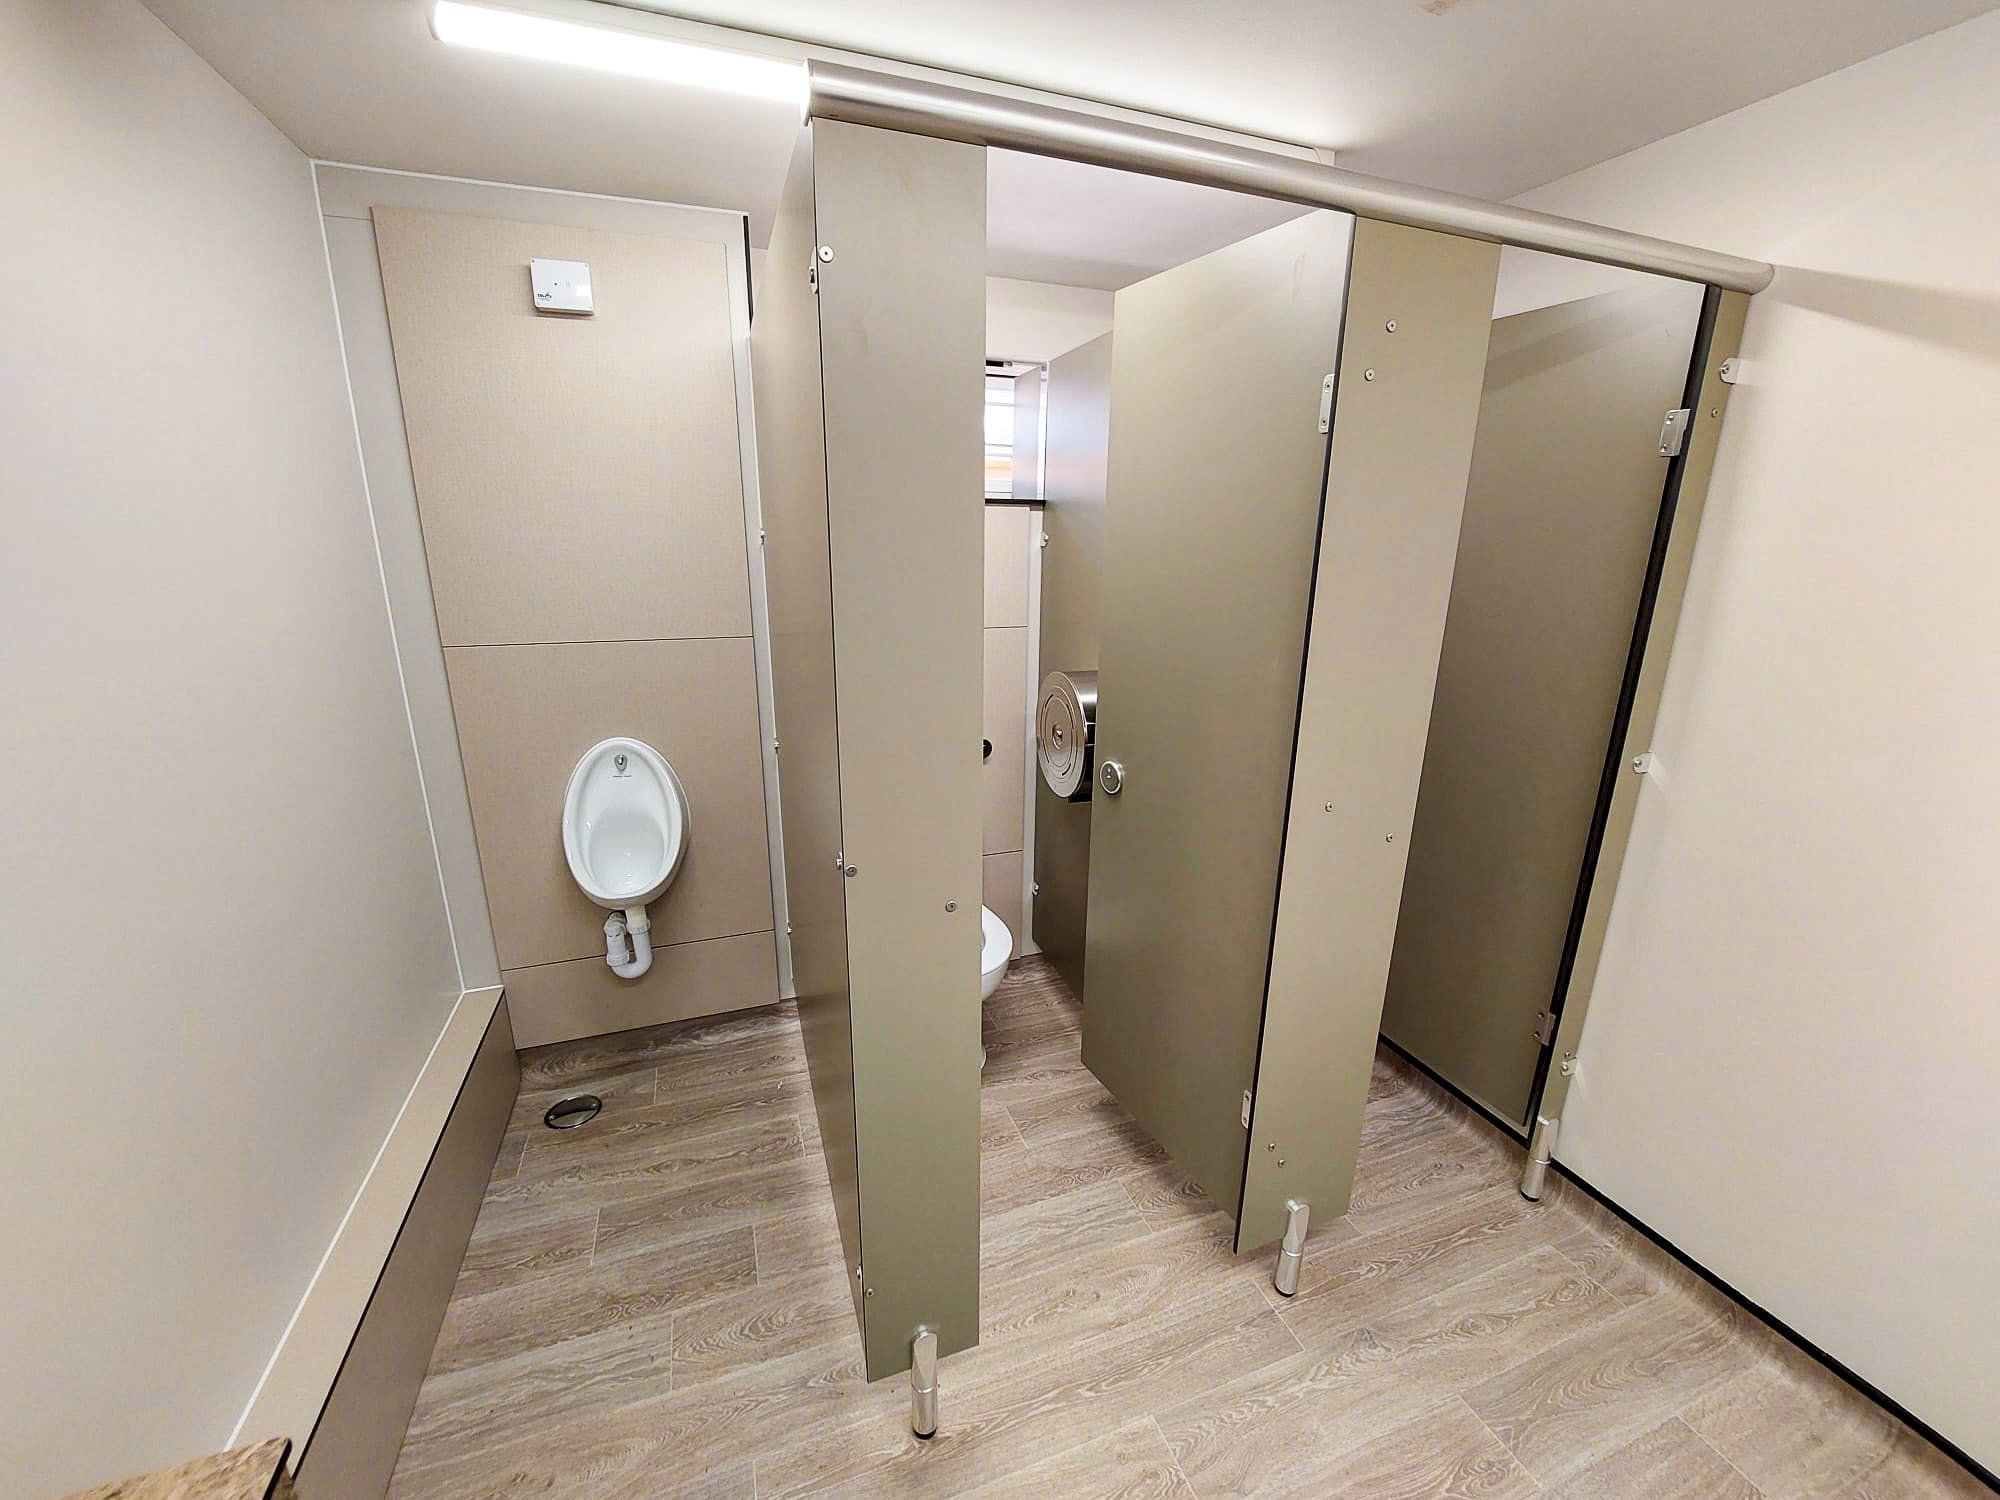 male toilet with woodgrain vinyl floor, full height urinal duct and half height ducting in toilet cubicles, all in a bespoke green colour at howletts zoo.jpg